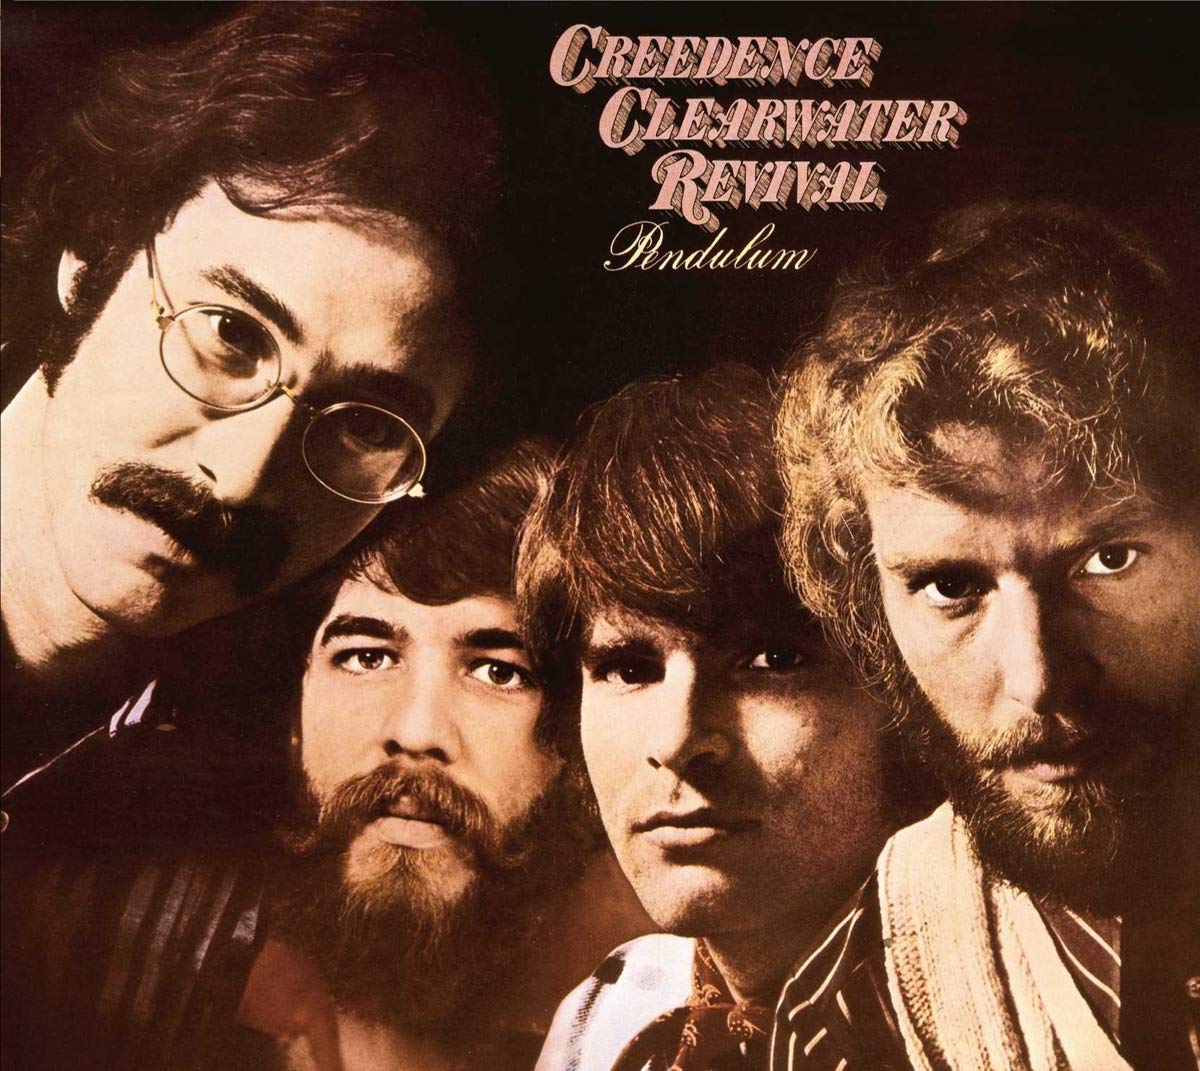 Creedence Clearwater revial